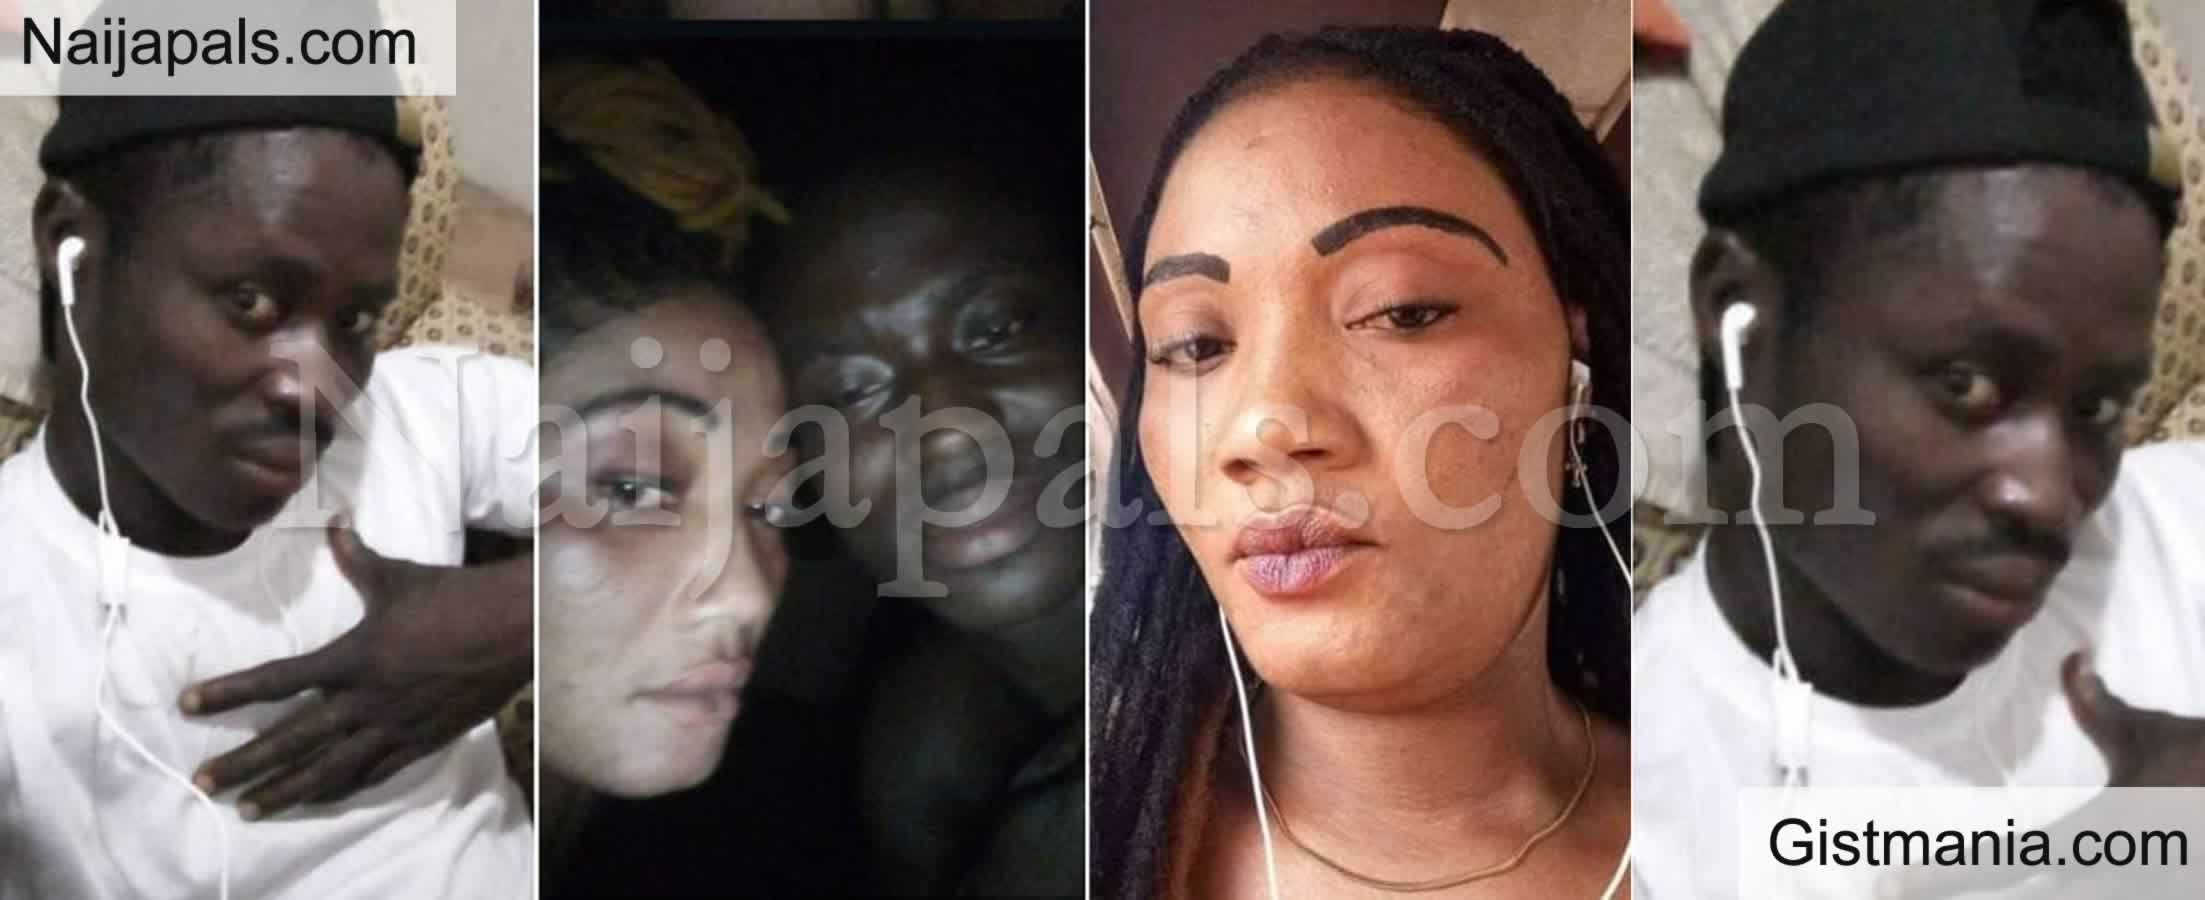 24-Yr-Old Man Kills Girlfriend In Ghana After Watching S*x Video Of Her With Another picture